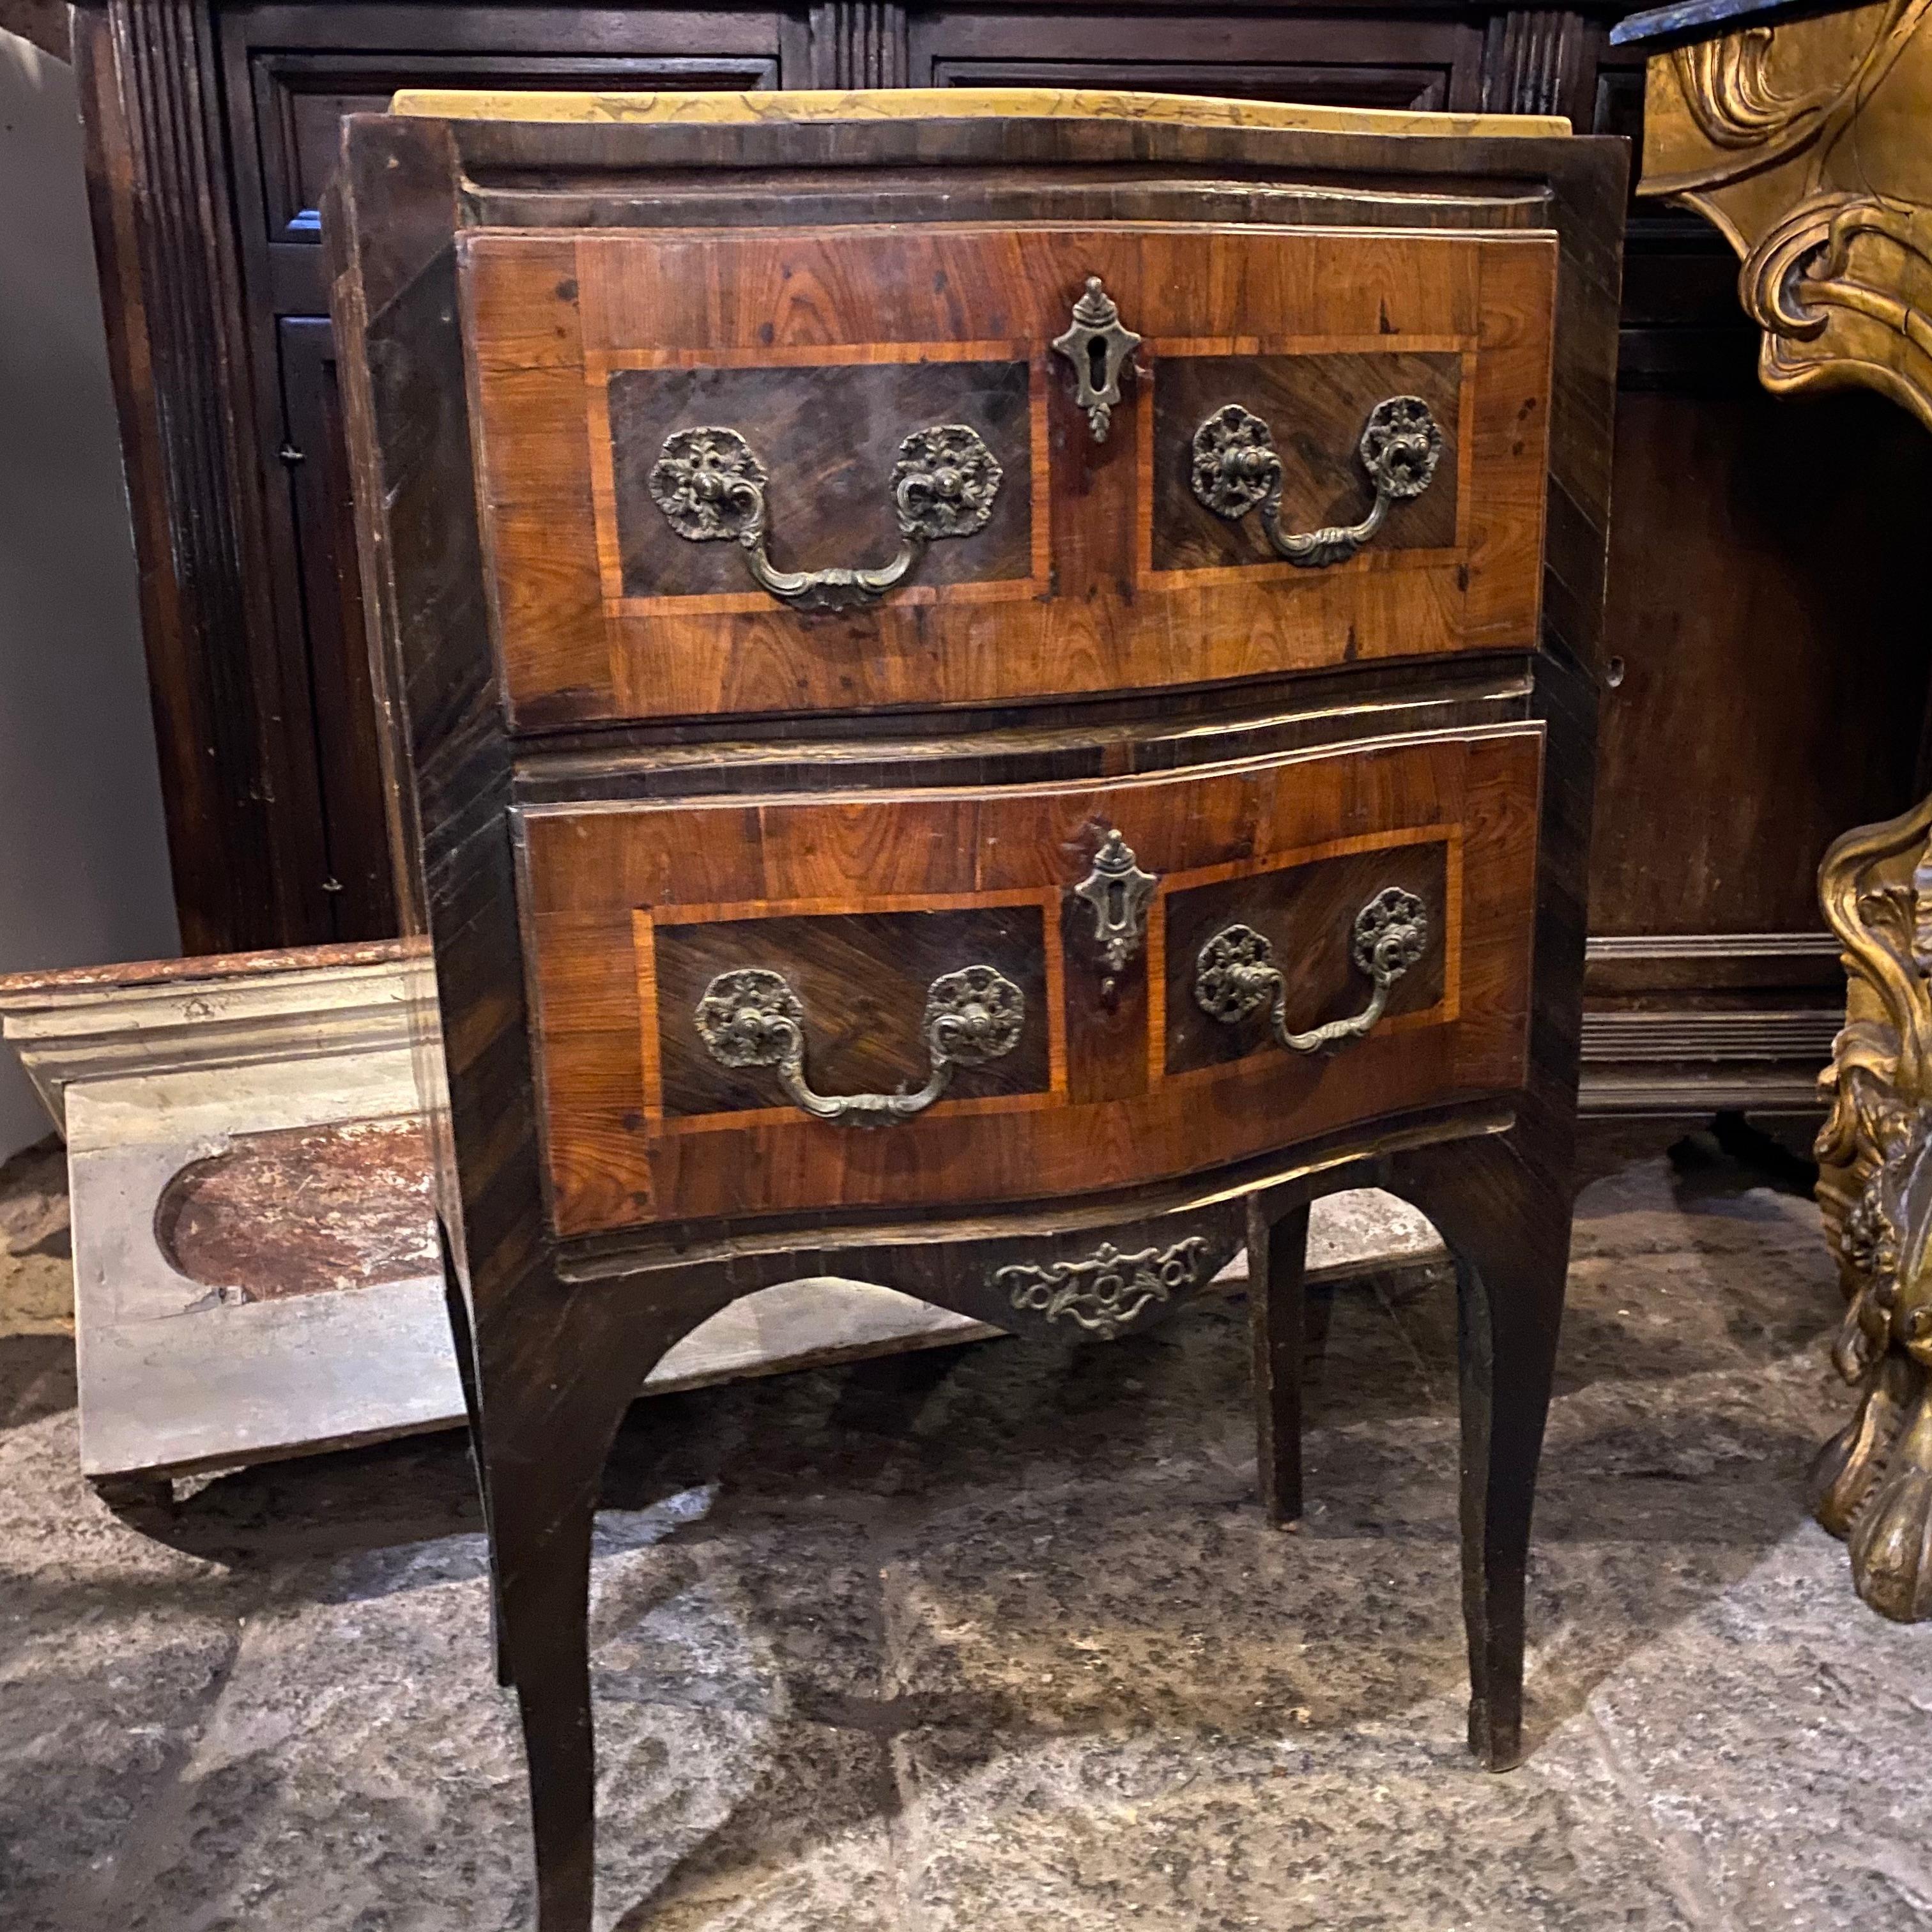 An original Italian fruitwood small dresser in original patina and conditions, yellow Siena marble on the top.